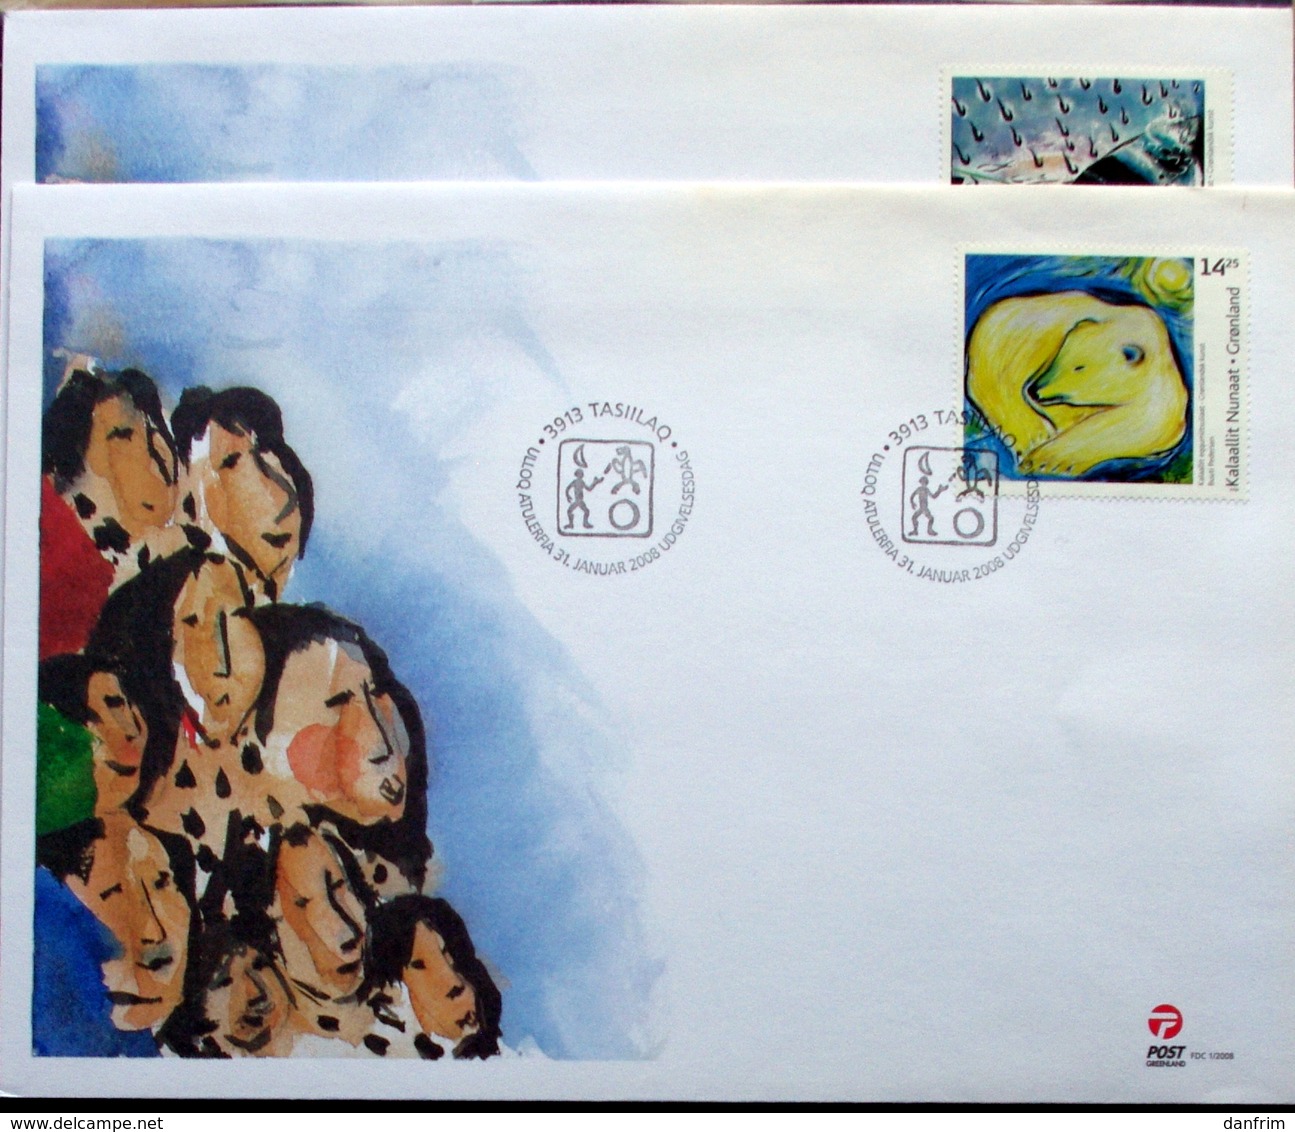 GREENLAND 2008  KUNST   Minr.506-8  + CARDS  FDC    (lot 6627) - FDC